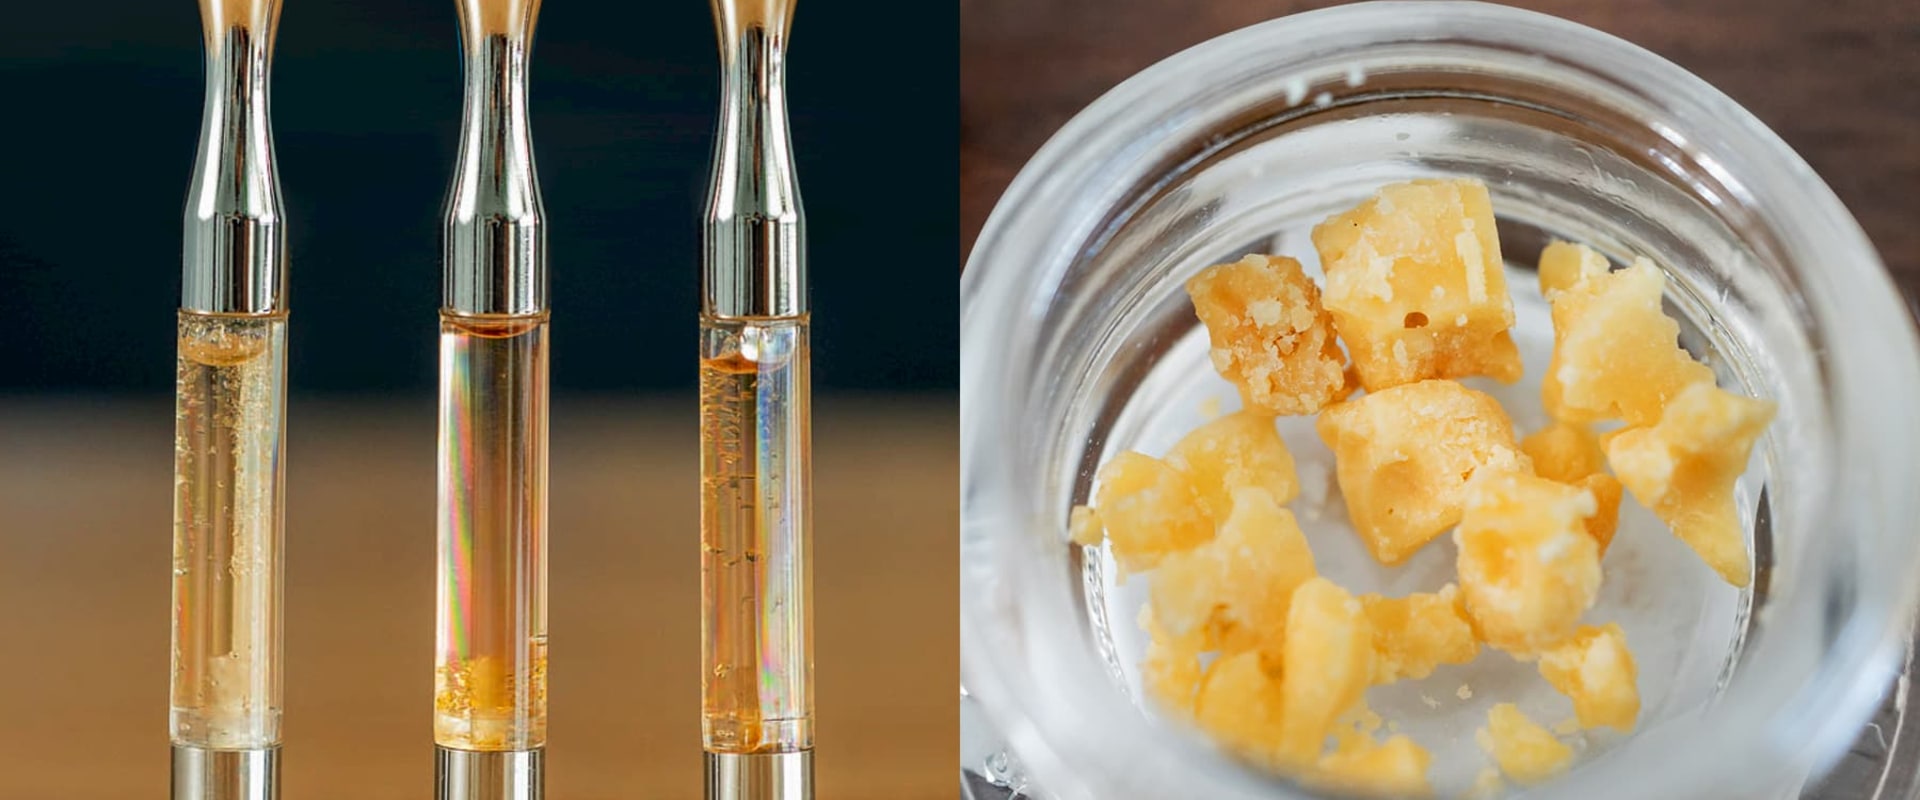 What is the difference between wax thc and other forms of thc?